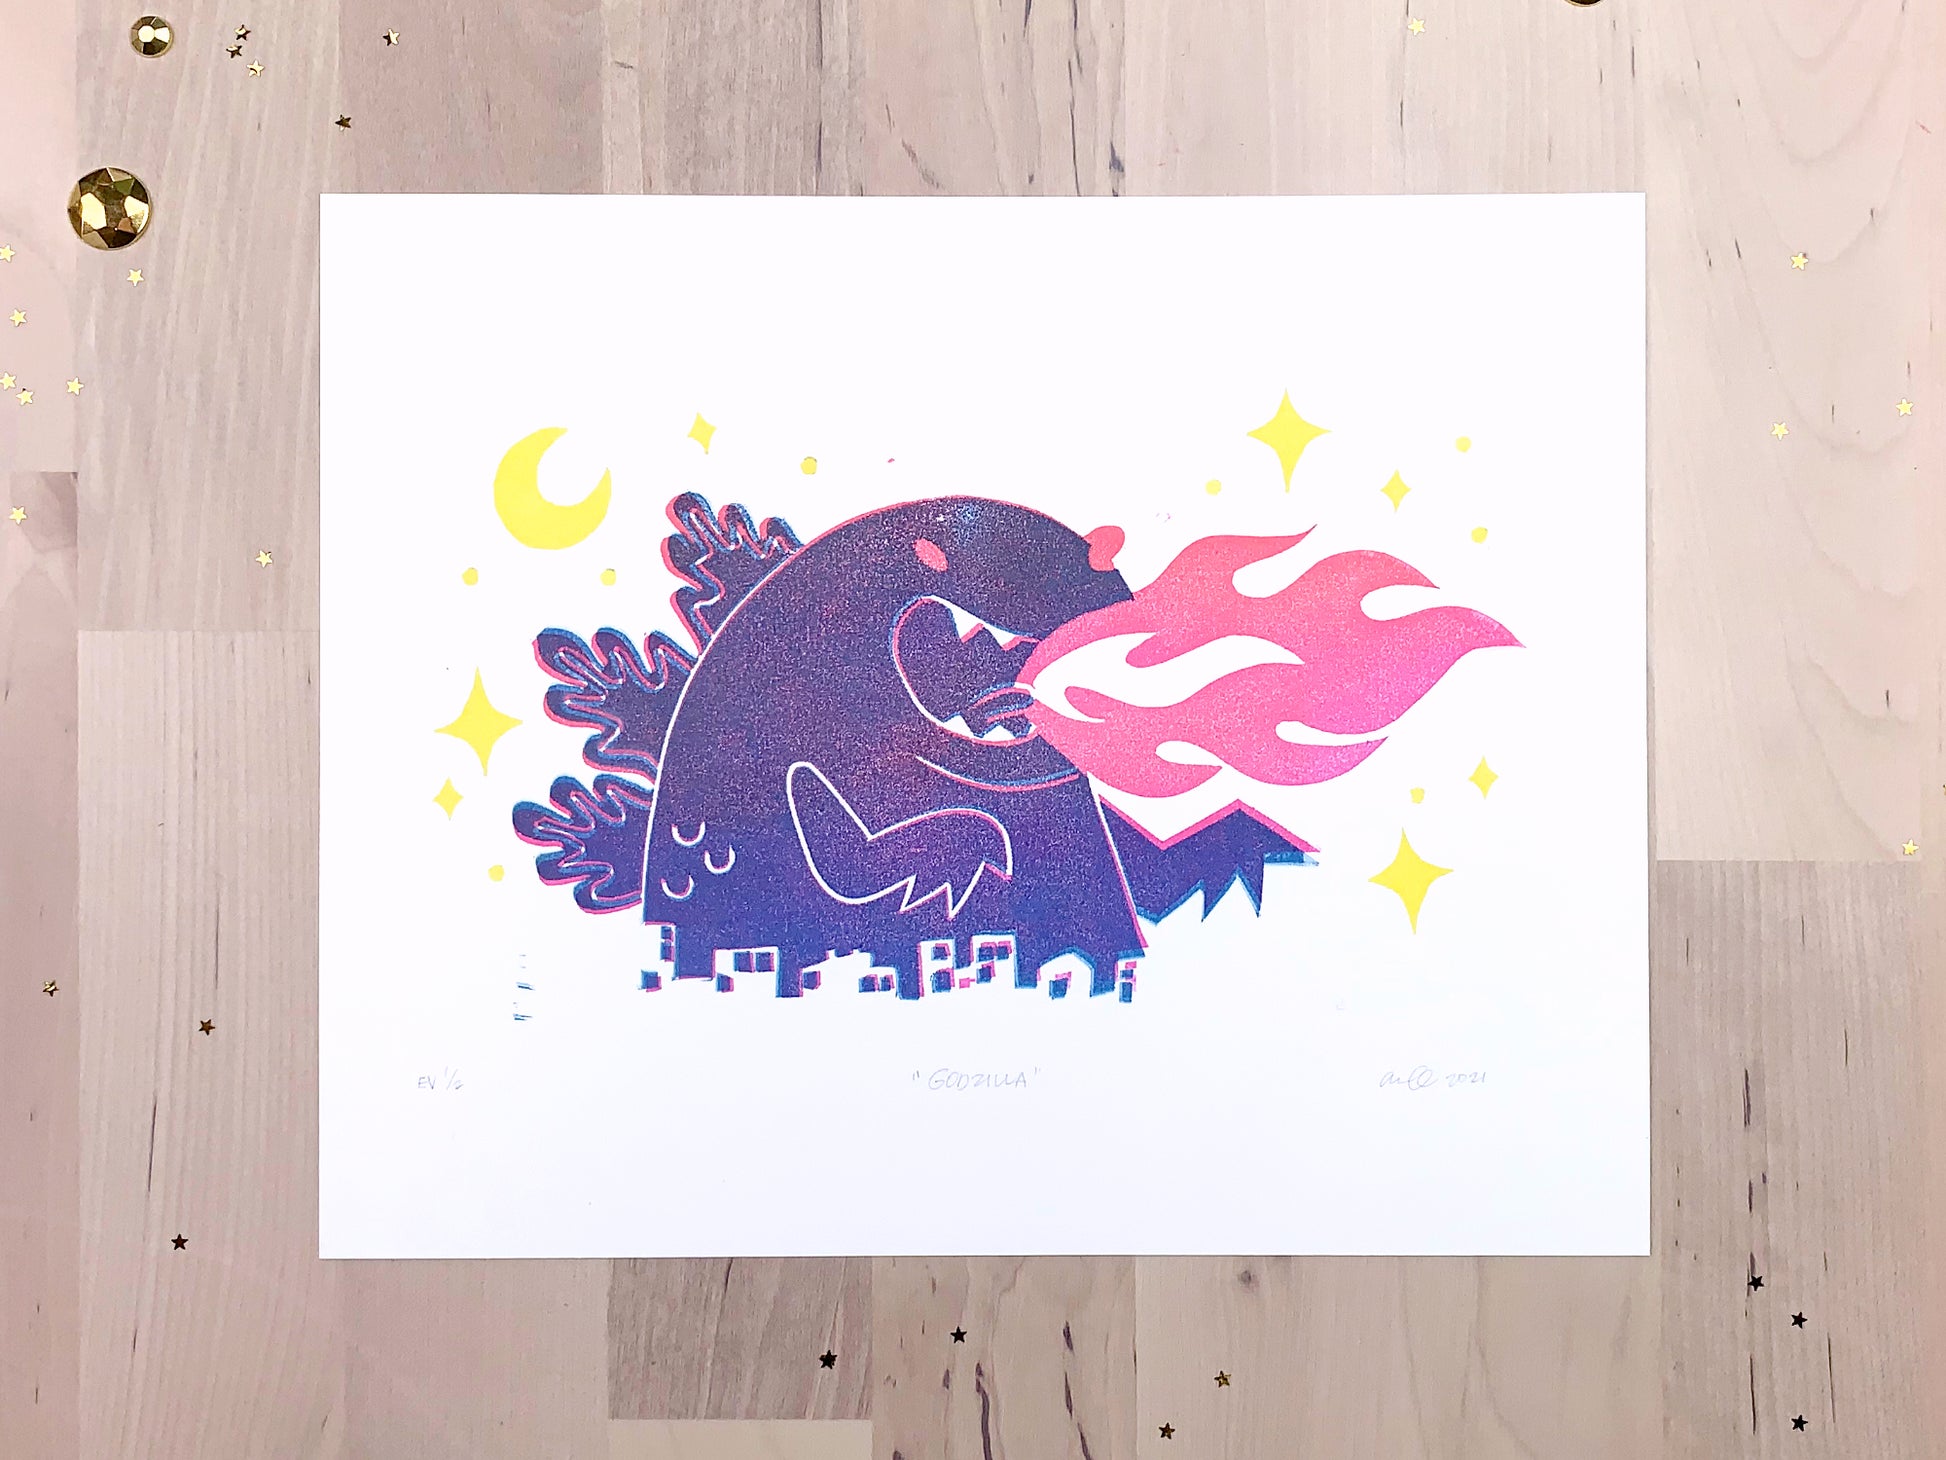 Original limited edition #1 art print by Amber Orenstein. Two color, pink and turquoise, reduction block print of a Japanese kaiju monster roaring with flames while destroying a city with yellow stars and moon.